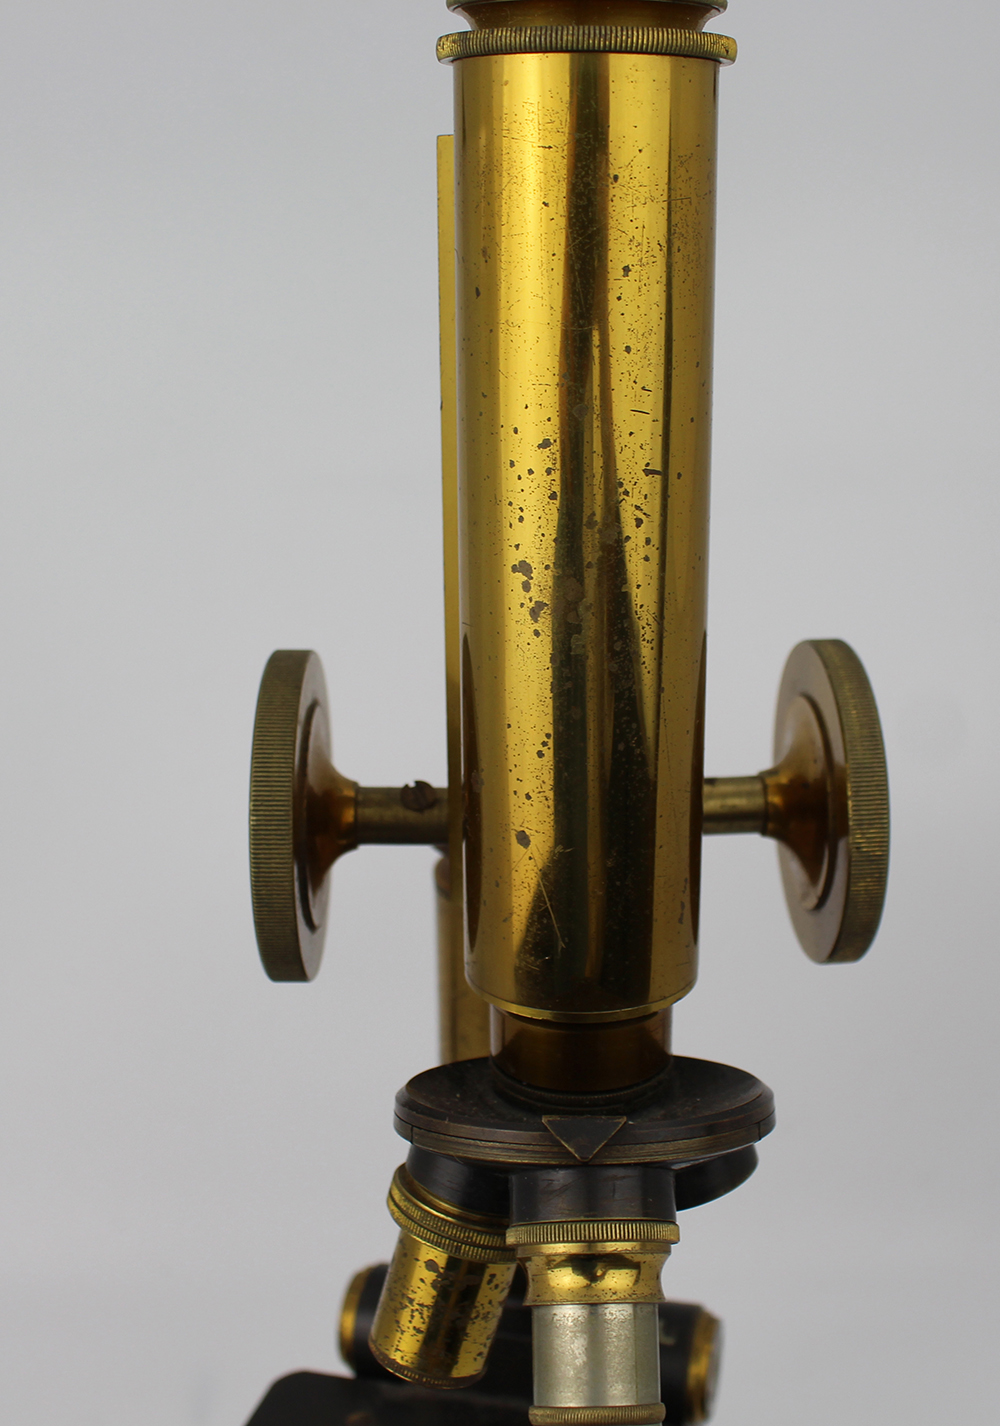 Antique Henry Crouch Microscope - Image 2 of 9